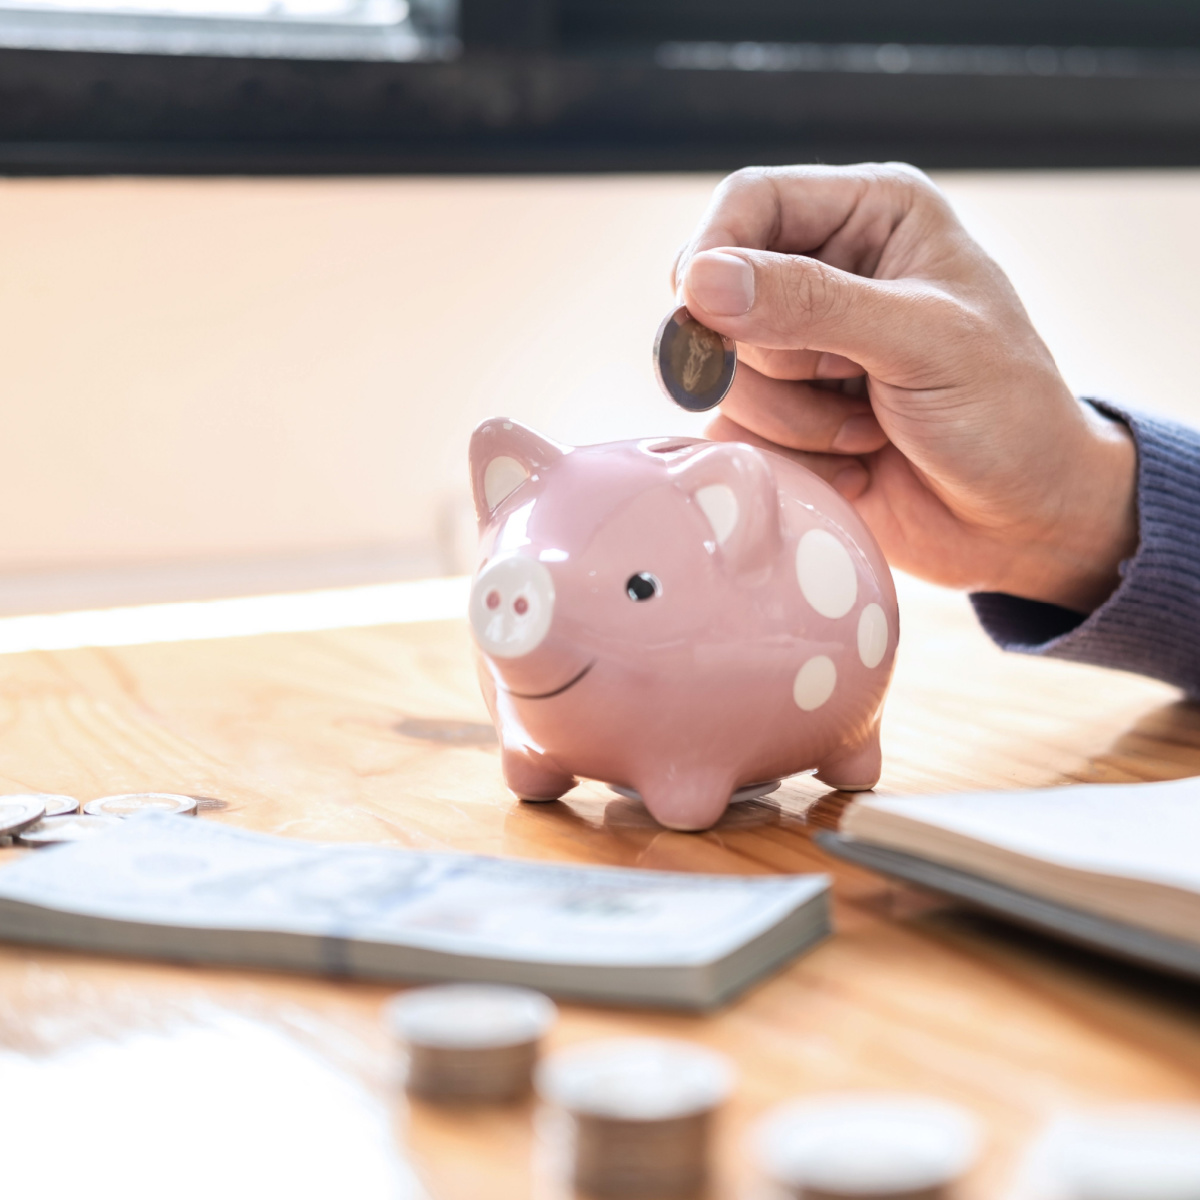 A man dropping a coin into a piggy bank to symbolize holistic planning for retirement backed by expert financial consulting